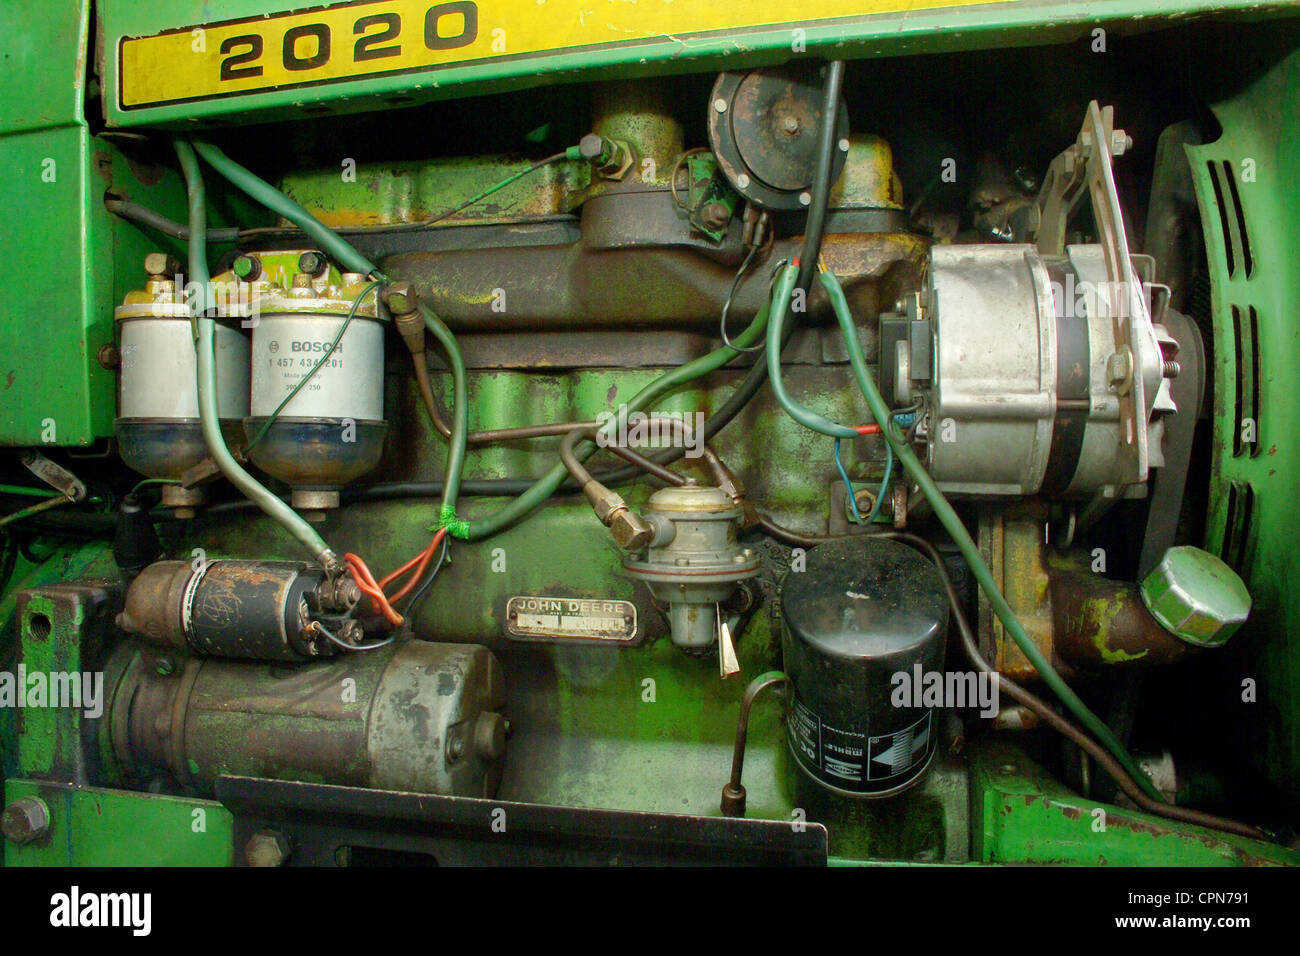 agriculture, engine, tractor, diesel engine, made by: John Deere, version  2020, diesel, 60 horsepower, technical insides, France, 1967, green,  agriculture, farming, technology, technologies, technics, Made in France,  60s, motor, motors, automotive ...